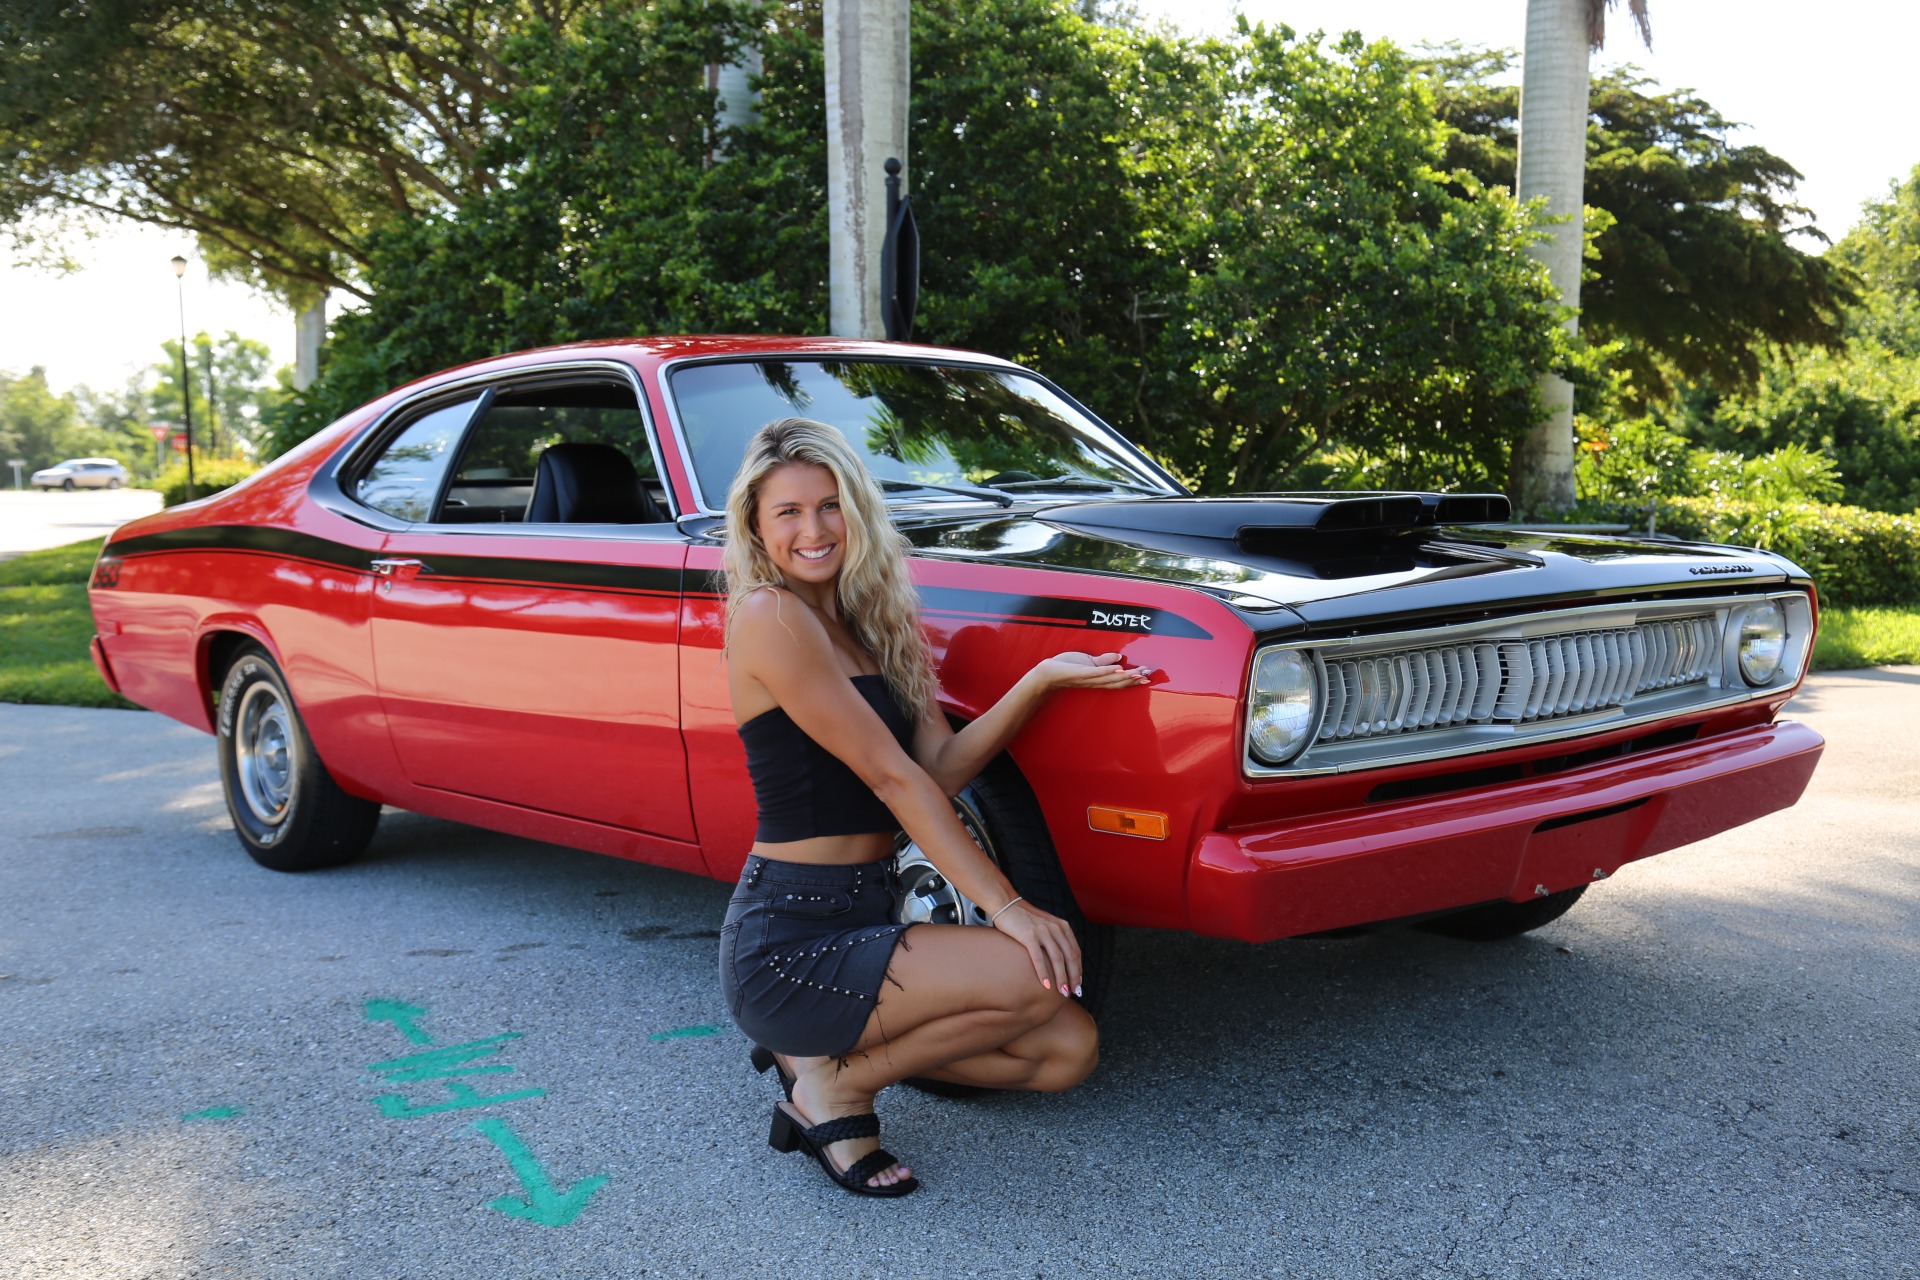 Used 1972 Plymouth Duster 383 4 speed Manual Pistol Grip for sale Sold at Muscle Cars for Sale Inc. in Fort Myers FL 33912 1